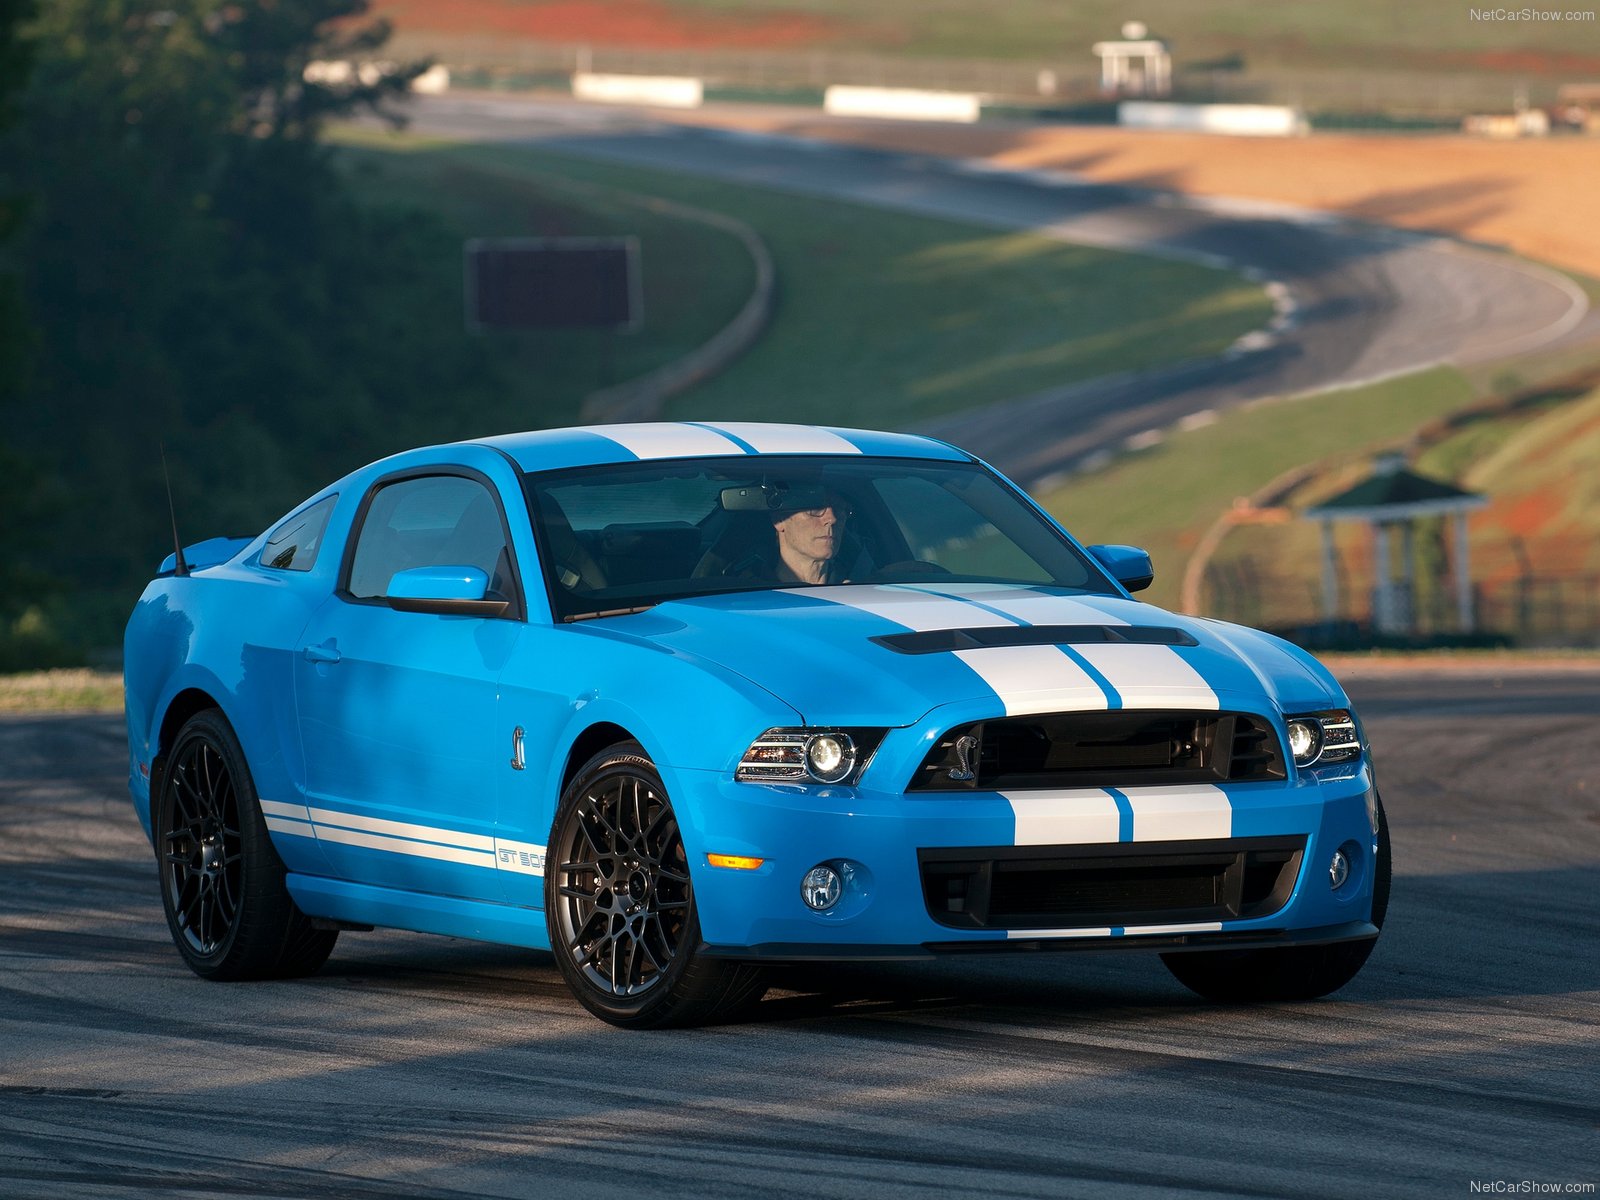 Ford Mustang Shelby Gt500 Wallpaper